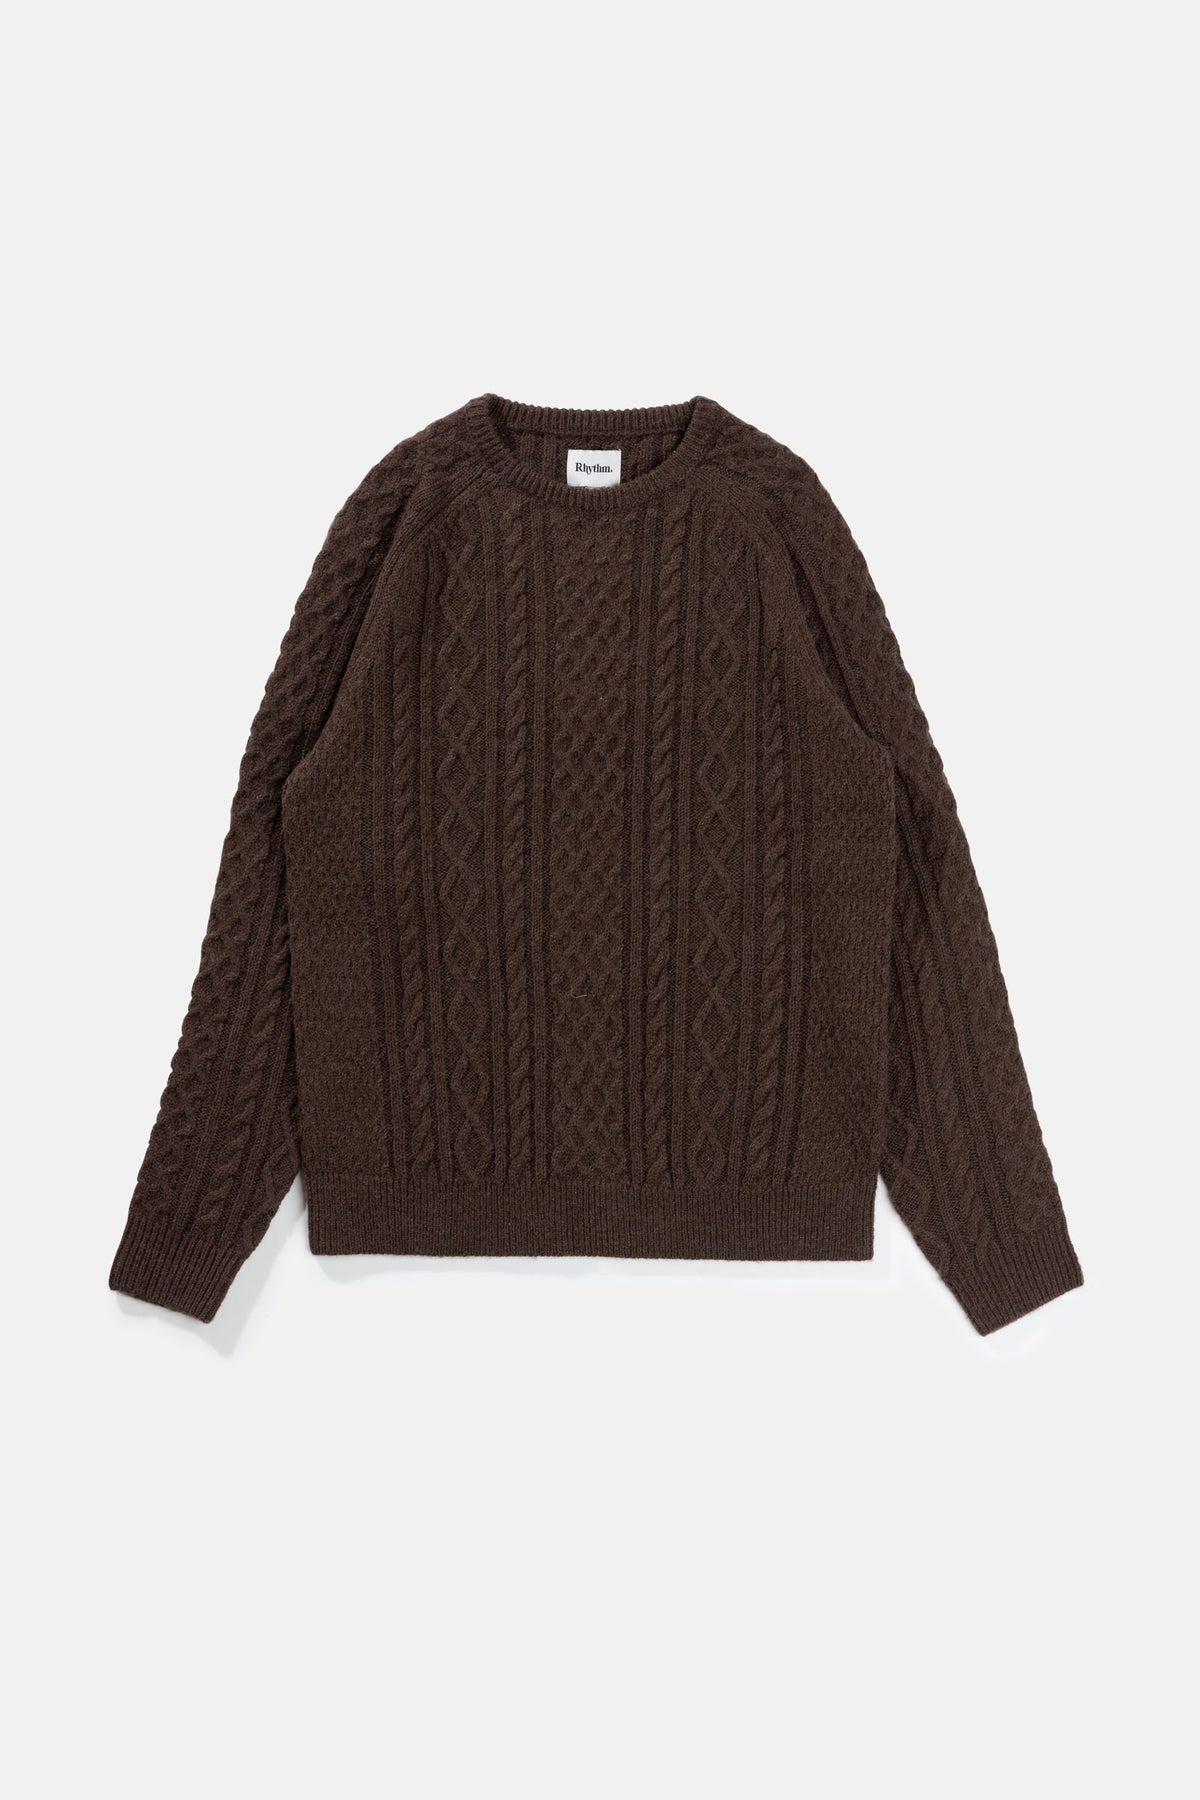 Mohair Fishermans Knit - BROWN